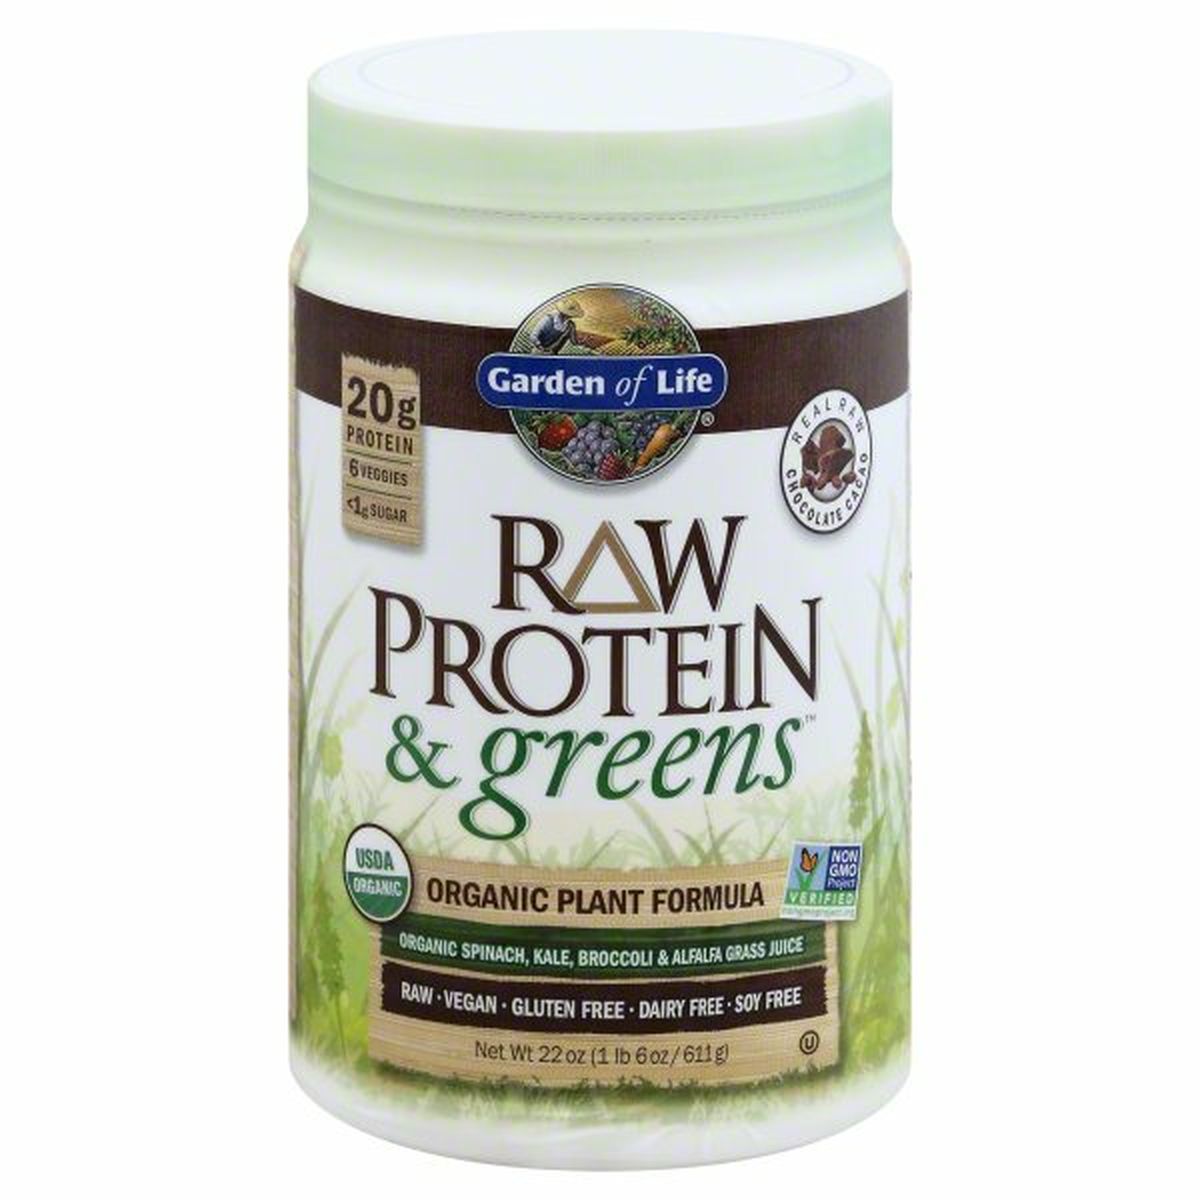 Calories in Garden of Life Raw Protein & Greens, Organic Plant Formula